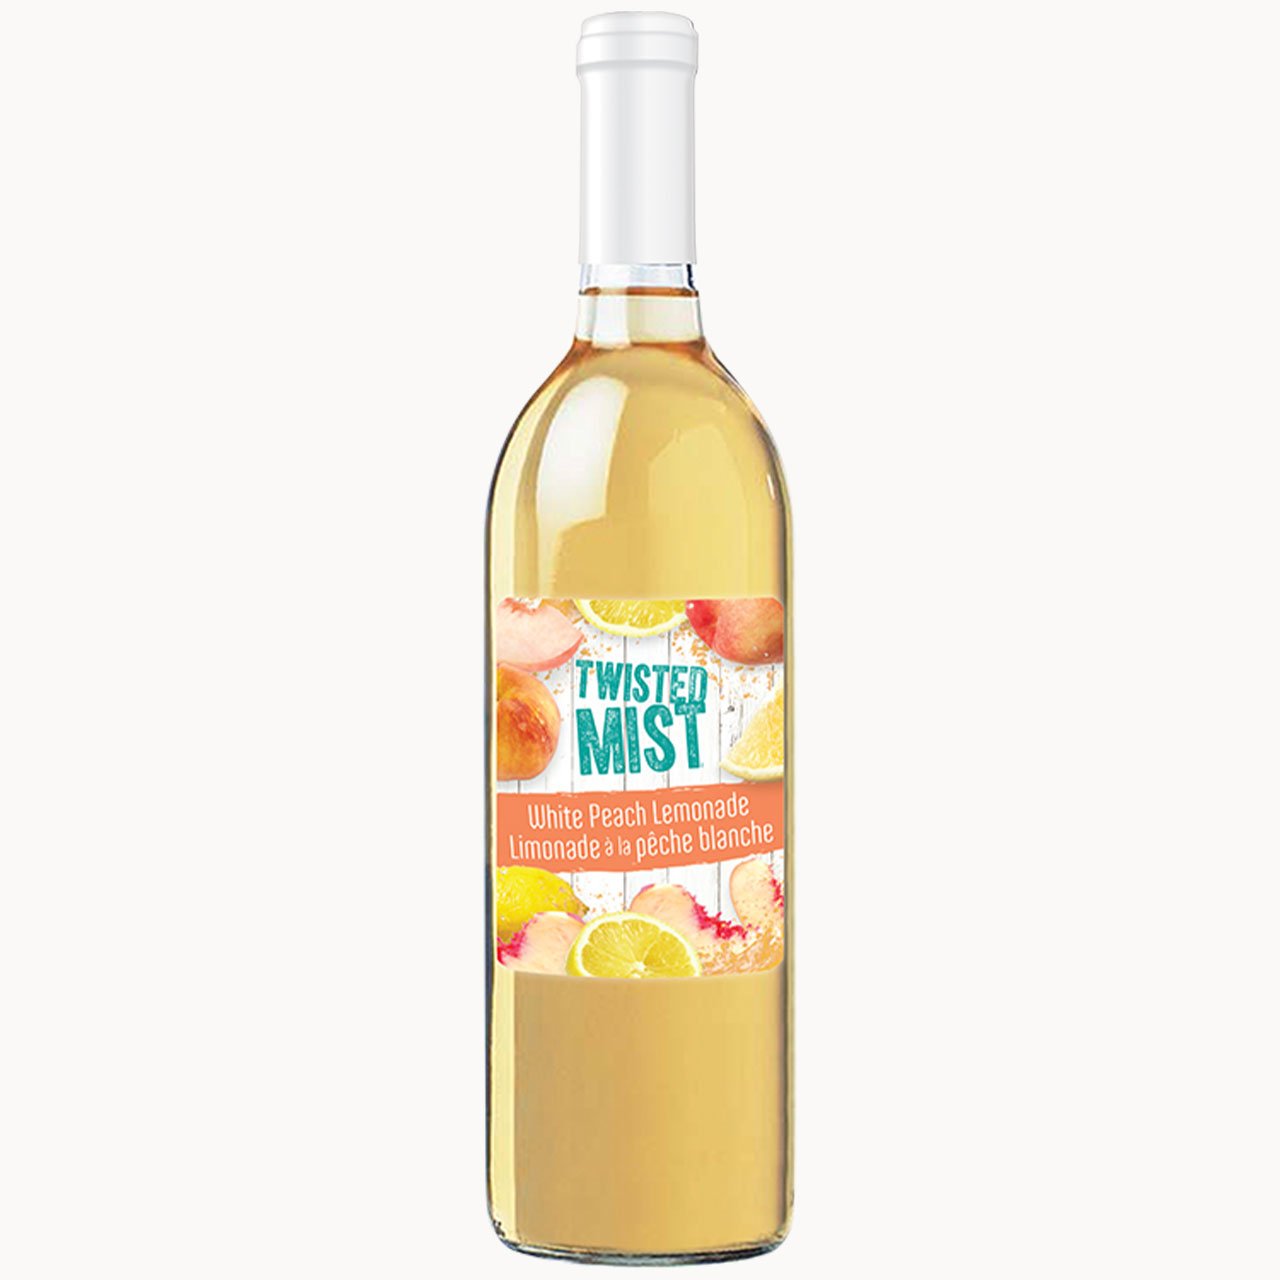 White Peach Lemonade Wine Cocktail Recipe Kit - Winexpert Twisted Mist Limited Edition - Preorder